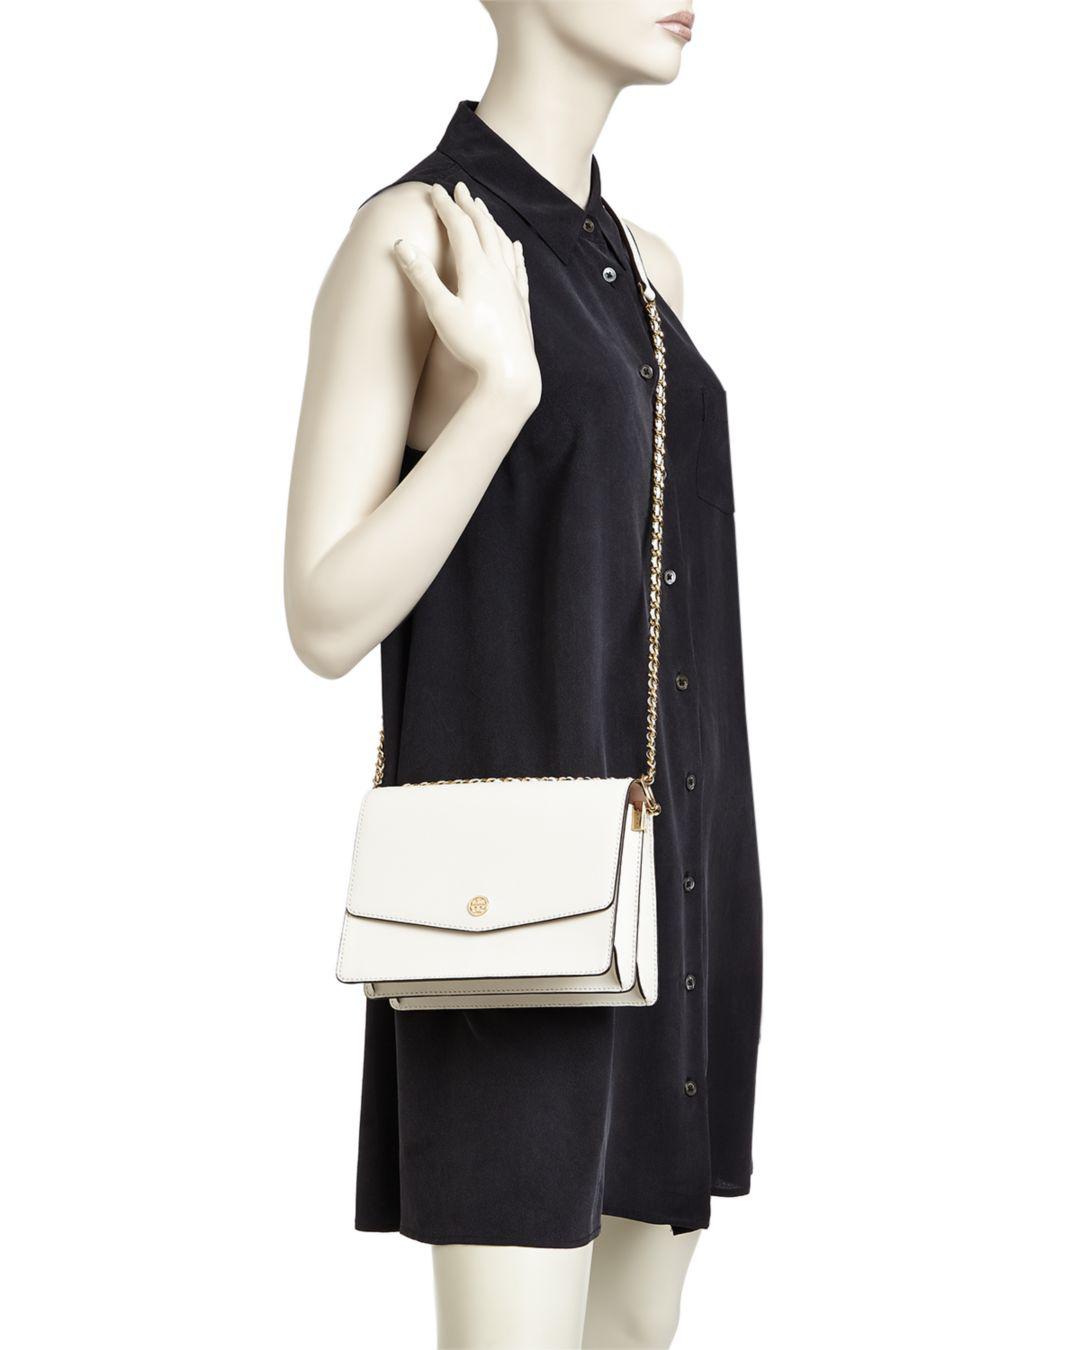 Tory Burch Robinson Convertible Leather Shoulder Bag in Black/Gold ...